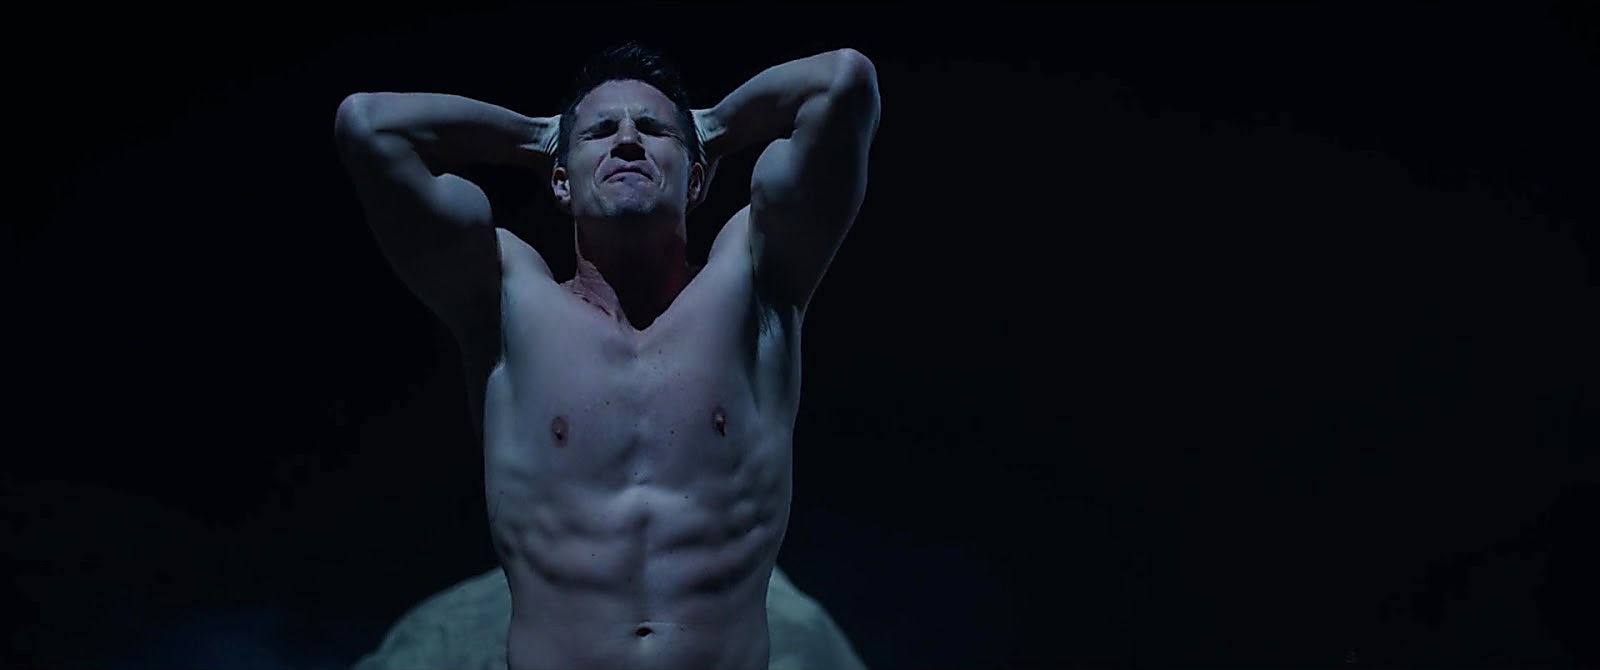 Robbie Amell sexy shirtless scene September 10, 2020, 8am